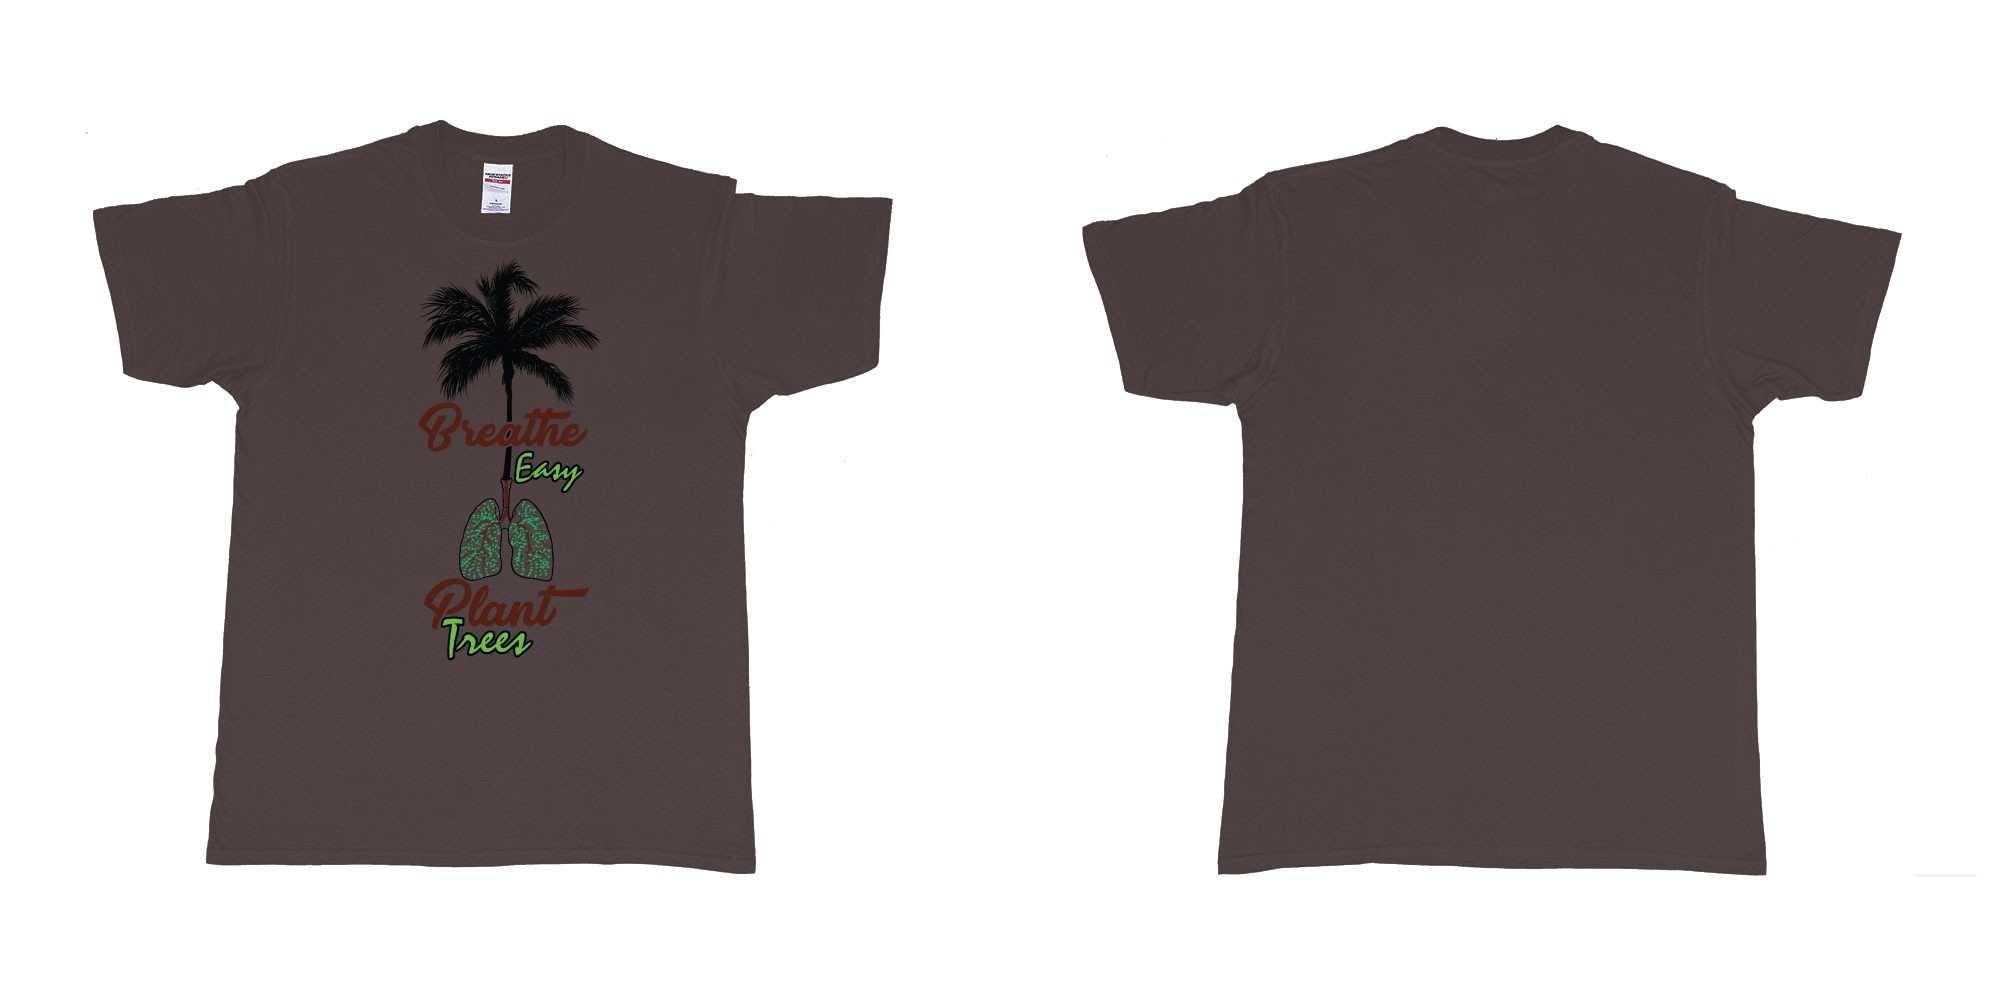 Custom tshirt design breathe easy and plant a tree for better air for everyone in fabric color dark-chocolate choice your own text made in Bali by The Pirate Way